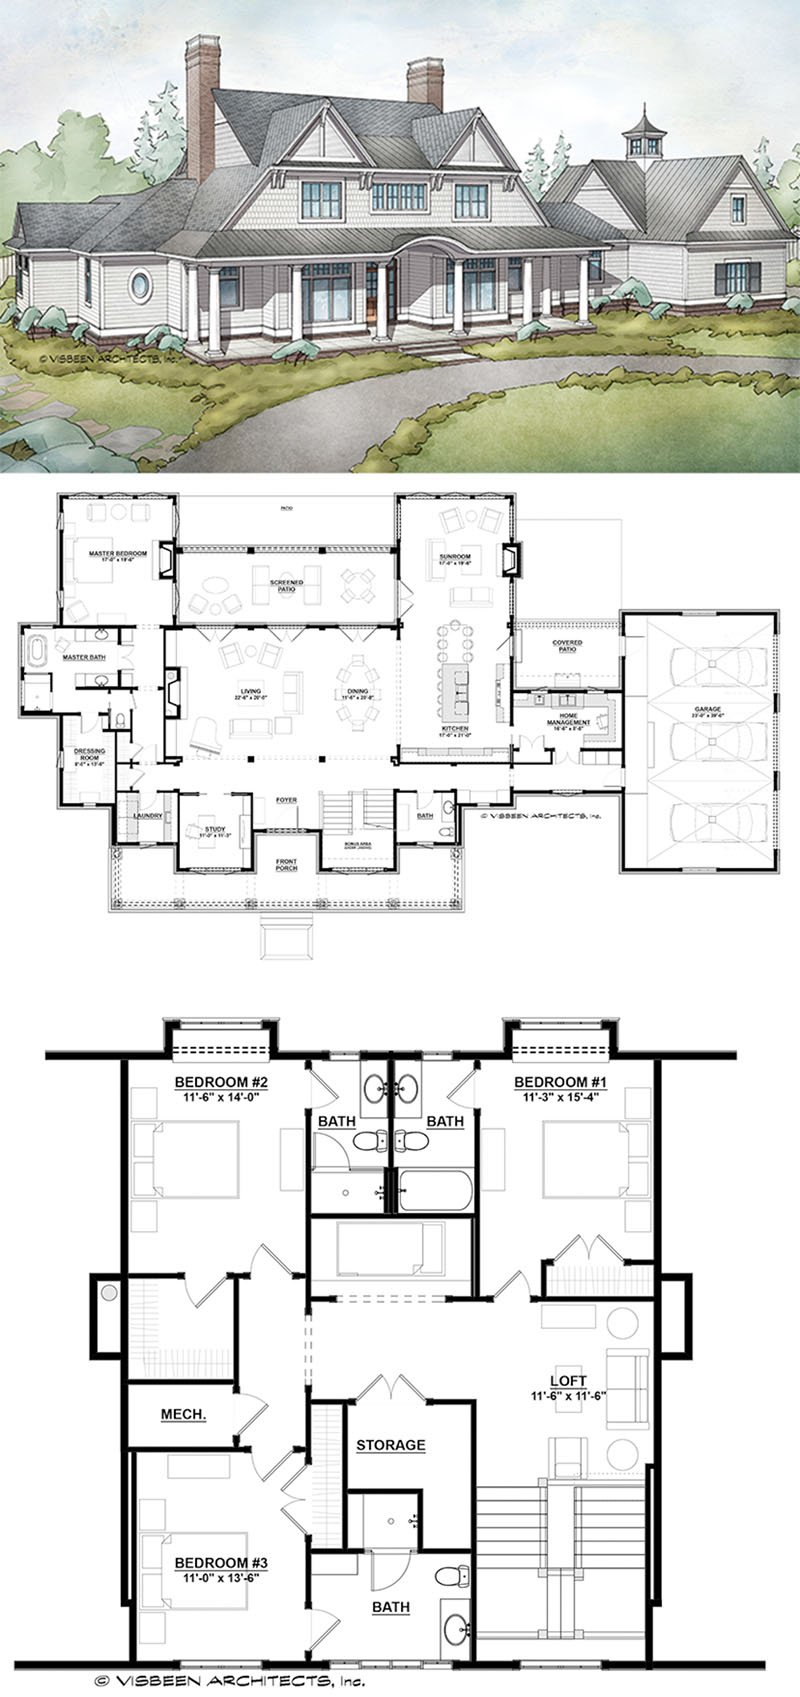 Most Popular Farmhouse Plans - Blueprints, layouts and details of the best farmhouses on the market. Building your dream home in the country? Get all your needs here! #farmhouseplans #farmhouse #blueprints #layouts